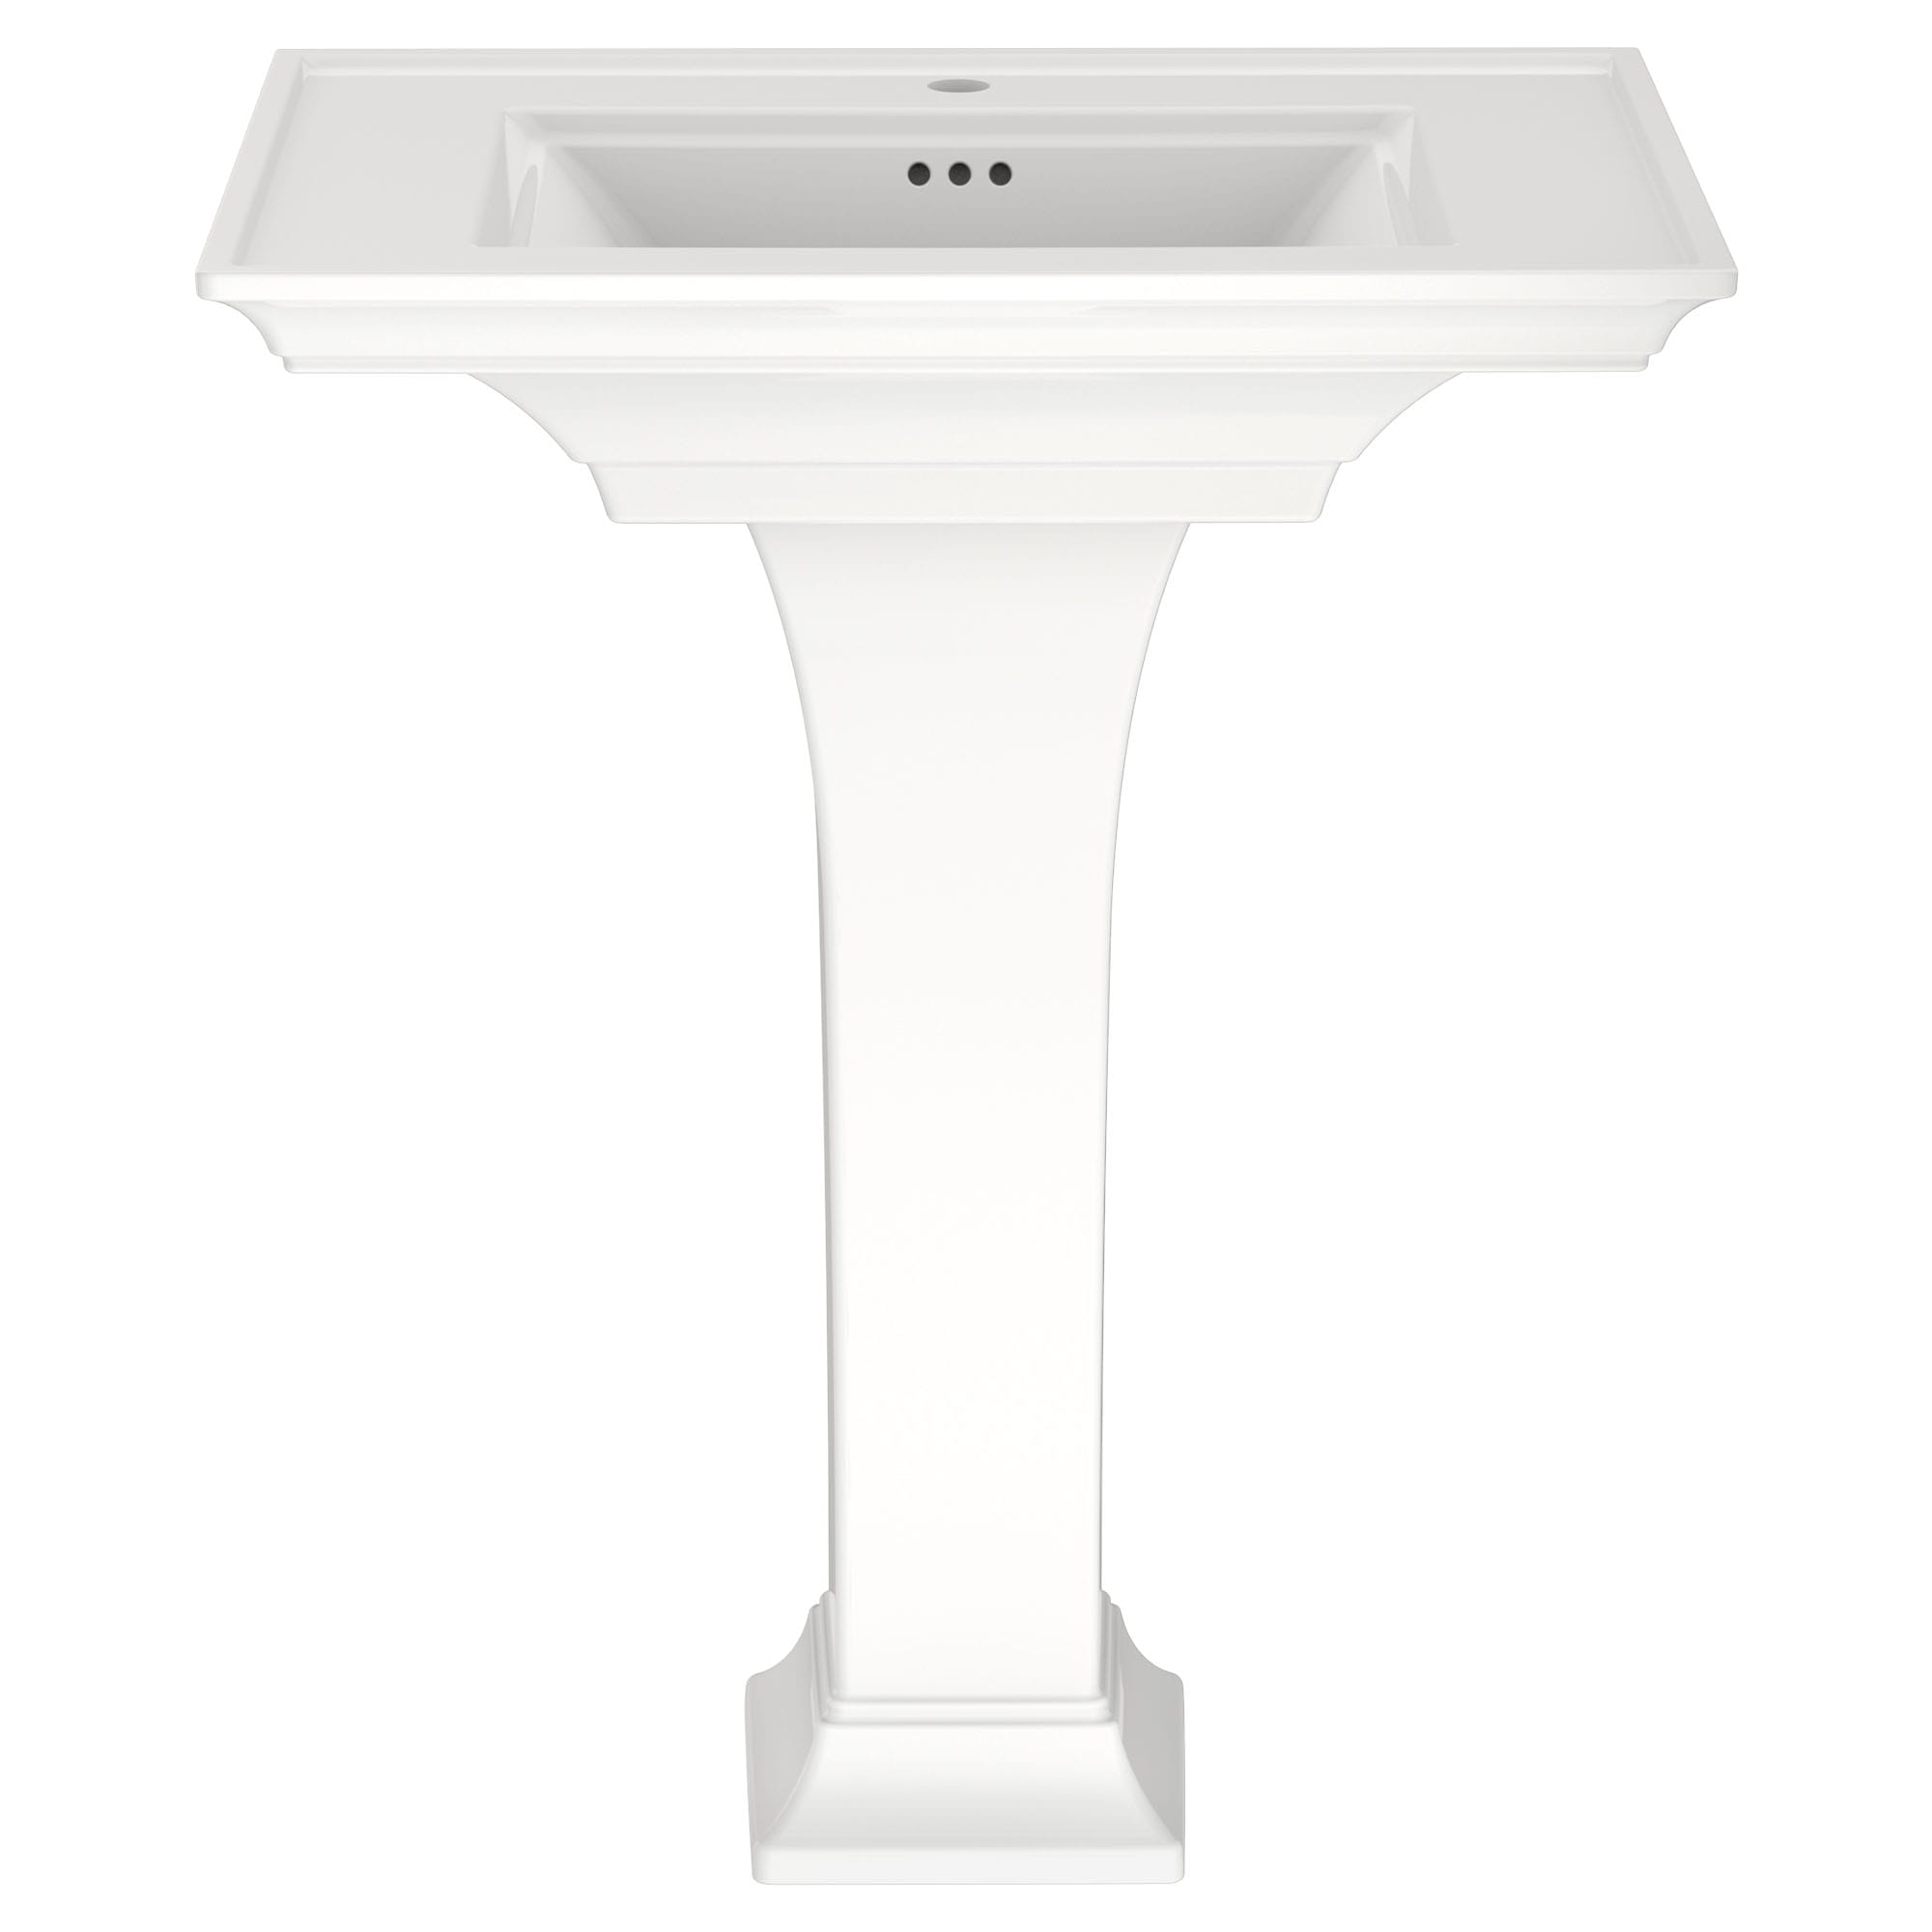 Town Square S Center Hole Only Pedestal Sink Top and Leg Combination WHITE